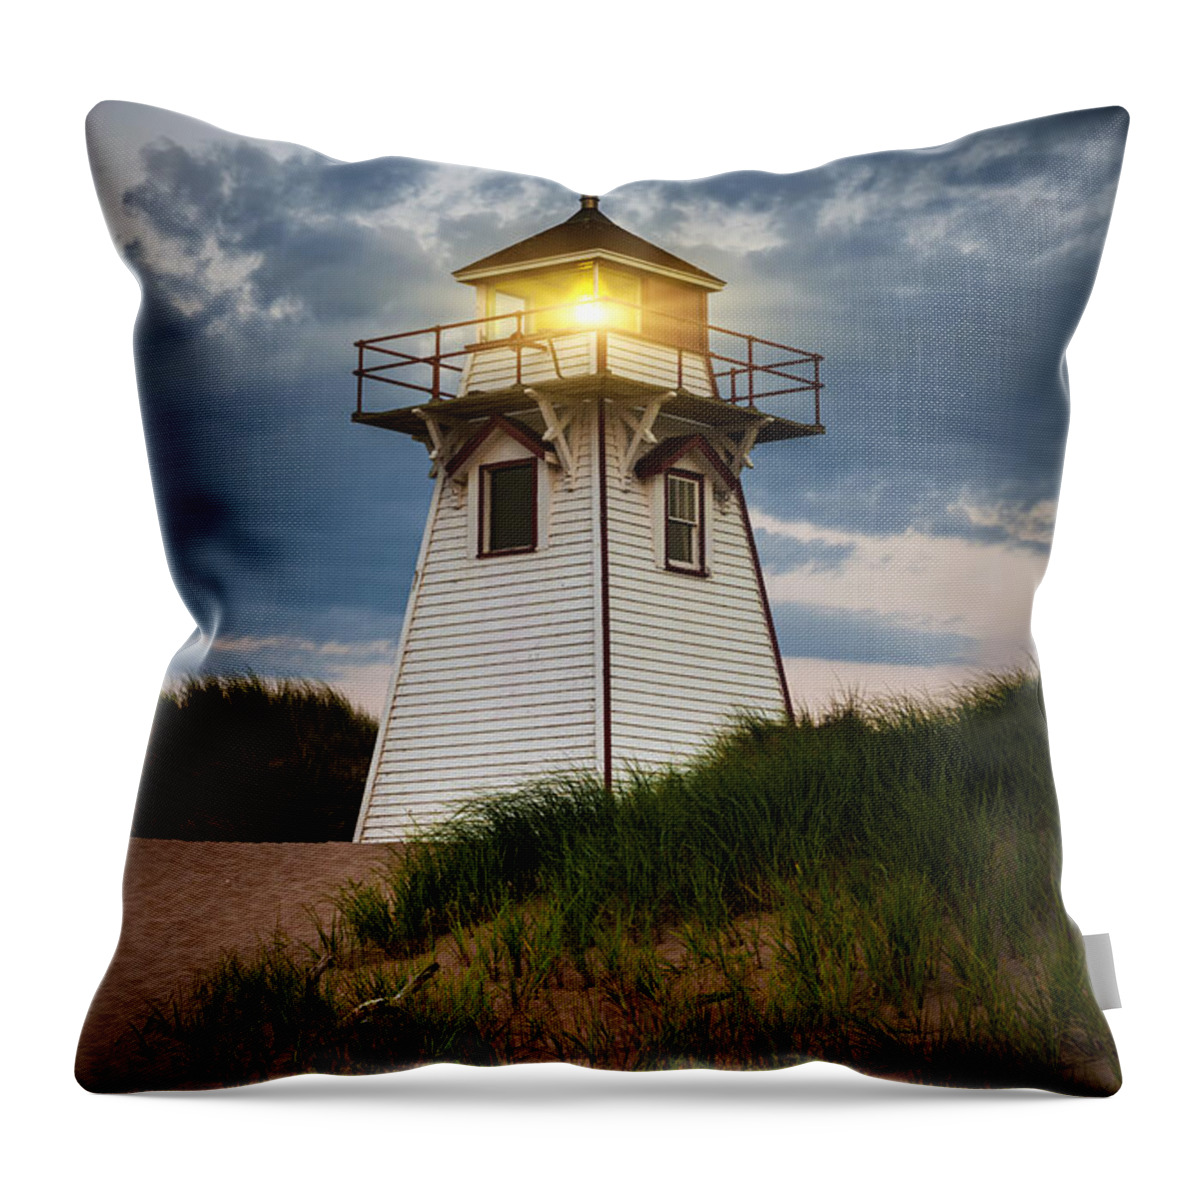 Sunset Throw Pillow featuring the photograph Dusk at Covehead Harbour Lighthouse by Elena Elisseeva